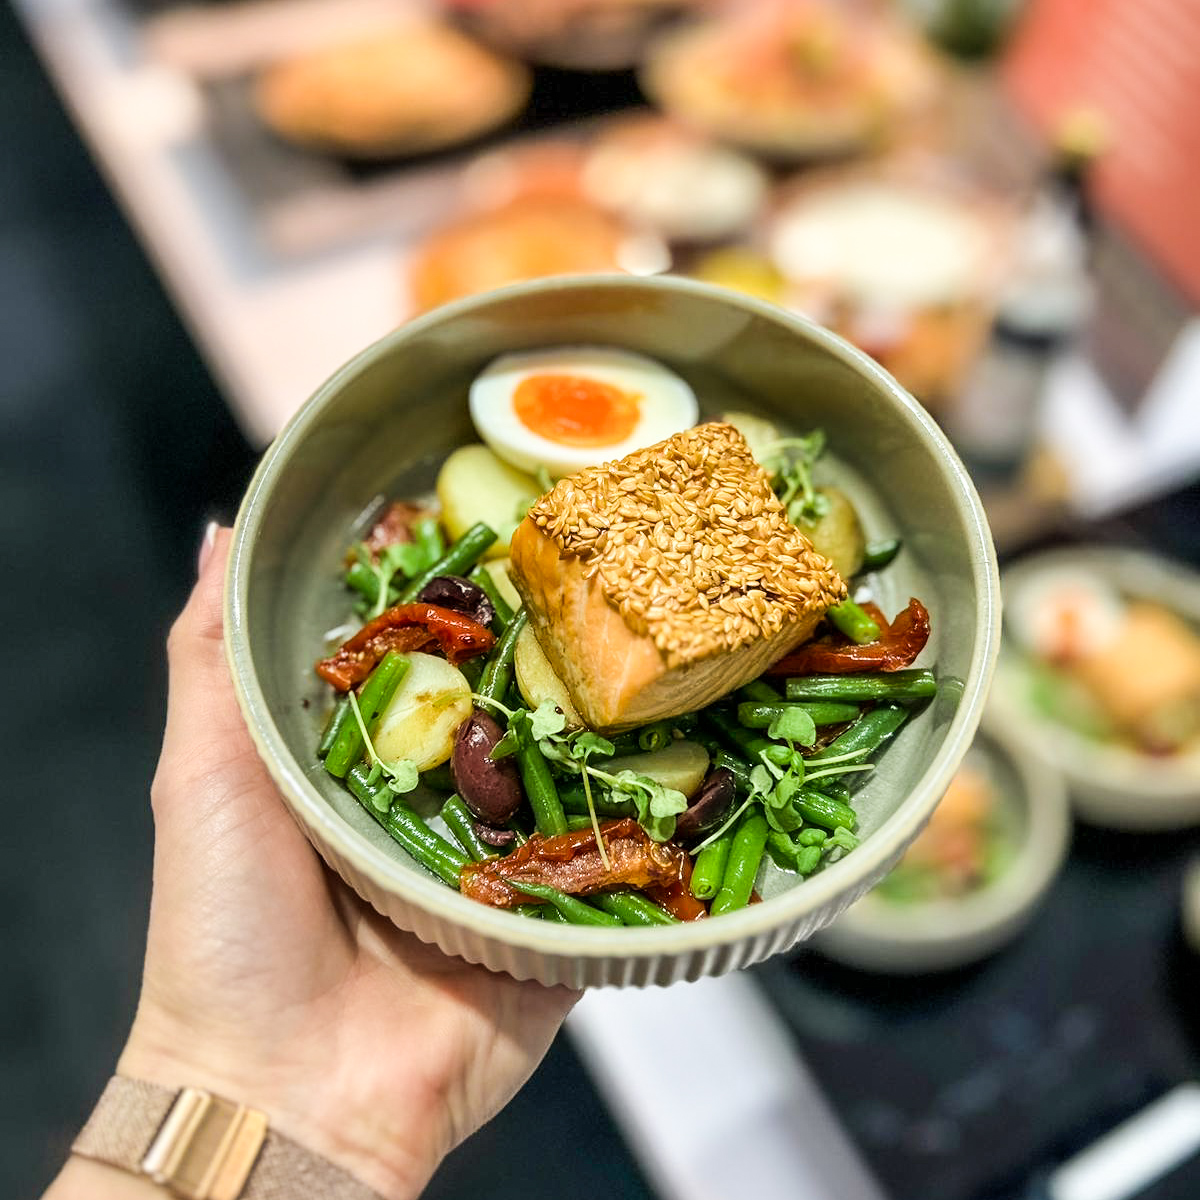 A beautiful Niçoise salad on the pass today. The perfect healthy light bite! 🤩 niçoise